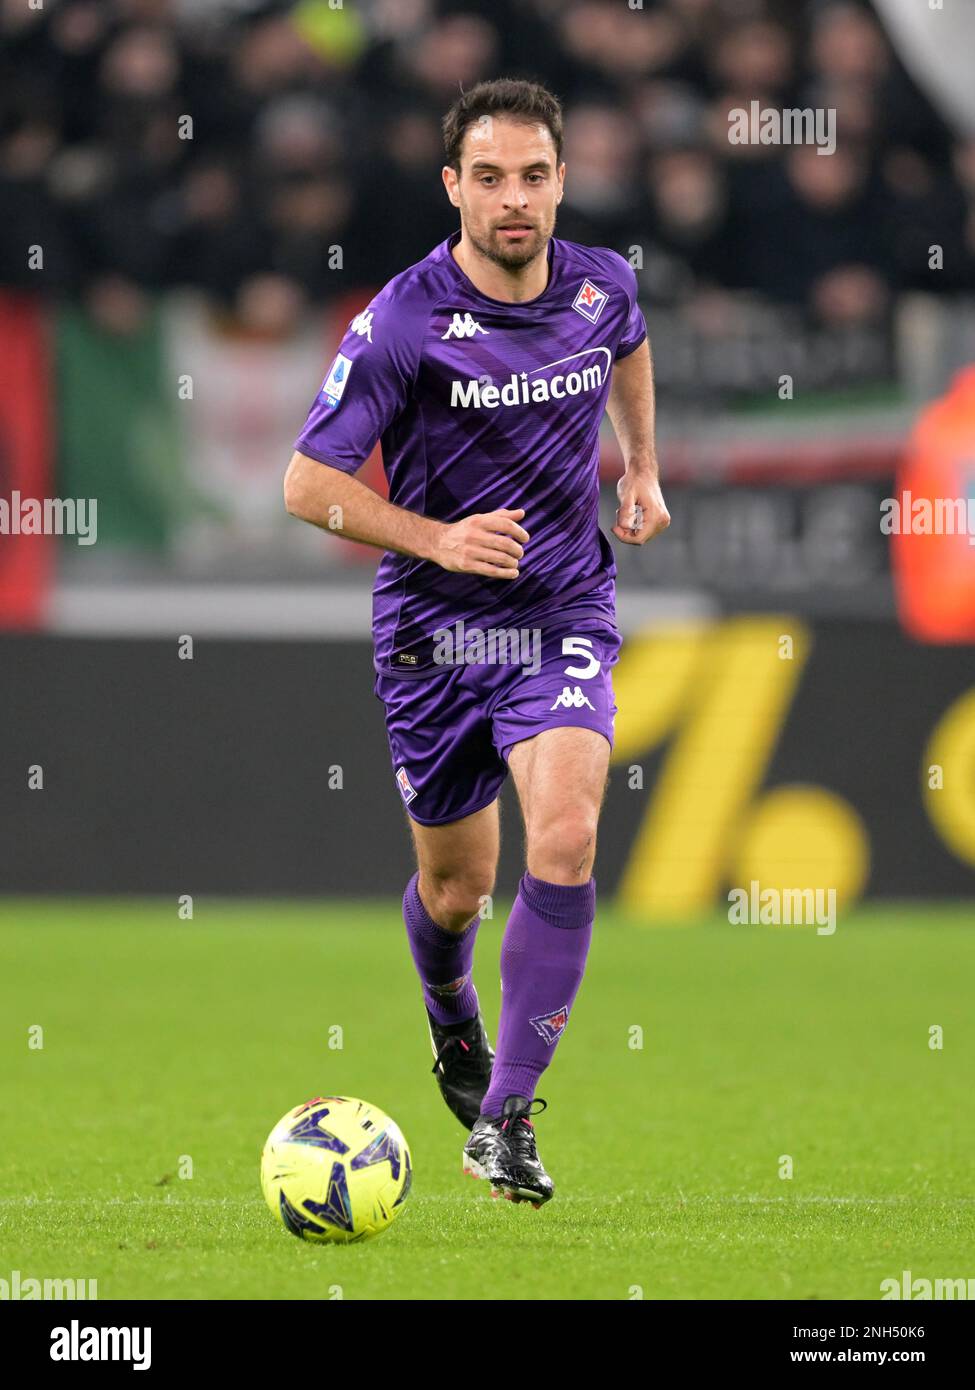 TURIN - Manuel Locatelli of Juventus FC during the Italian Serie A match between Juventus FC and ACF Fiorentina at Allianz Stadium on February 12, 2023 in Turin, Italy. AP | Dutch Height | GERRIT OF COLOGNE Stock Photo